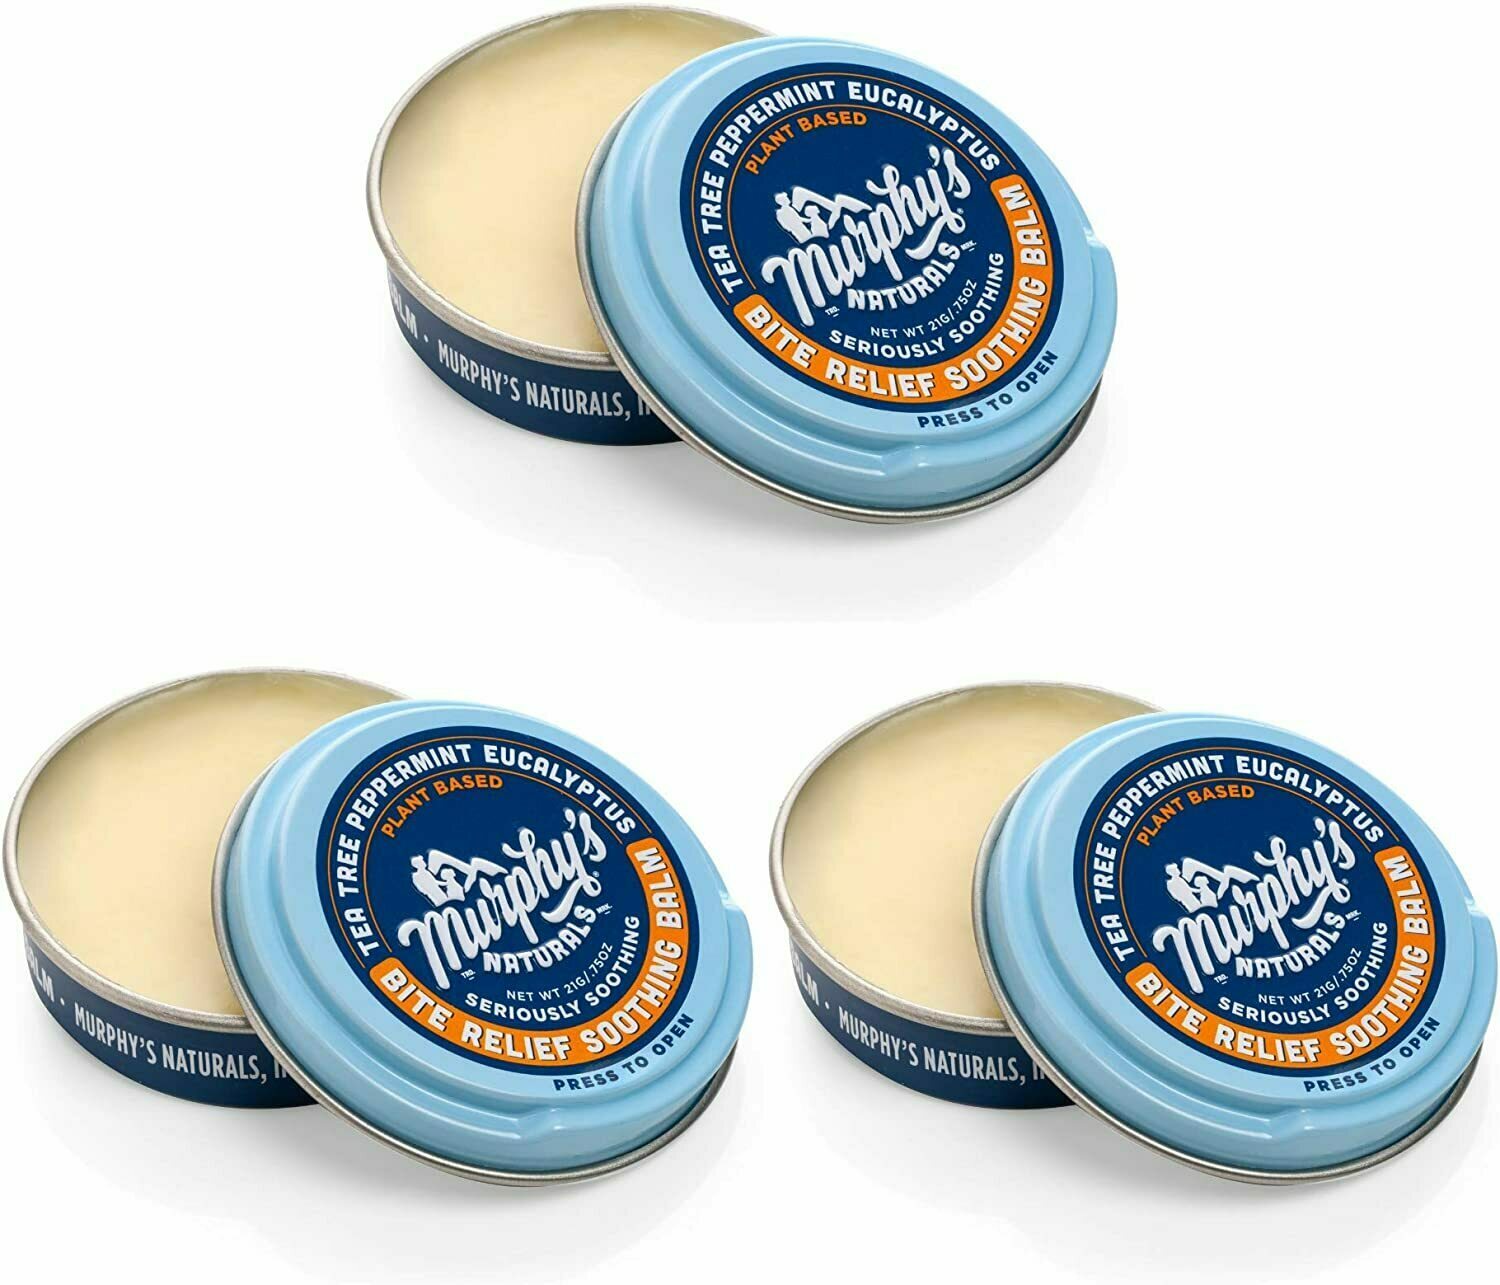 Bite Relief Soothing Balm by Murphy's Naturals